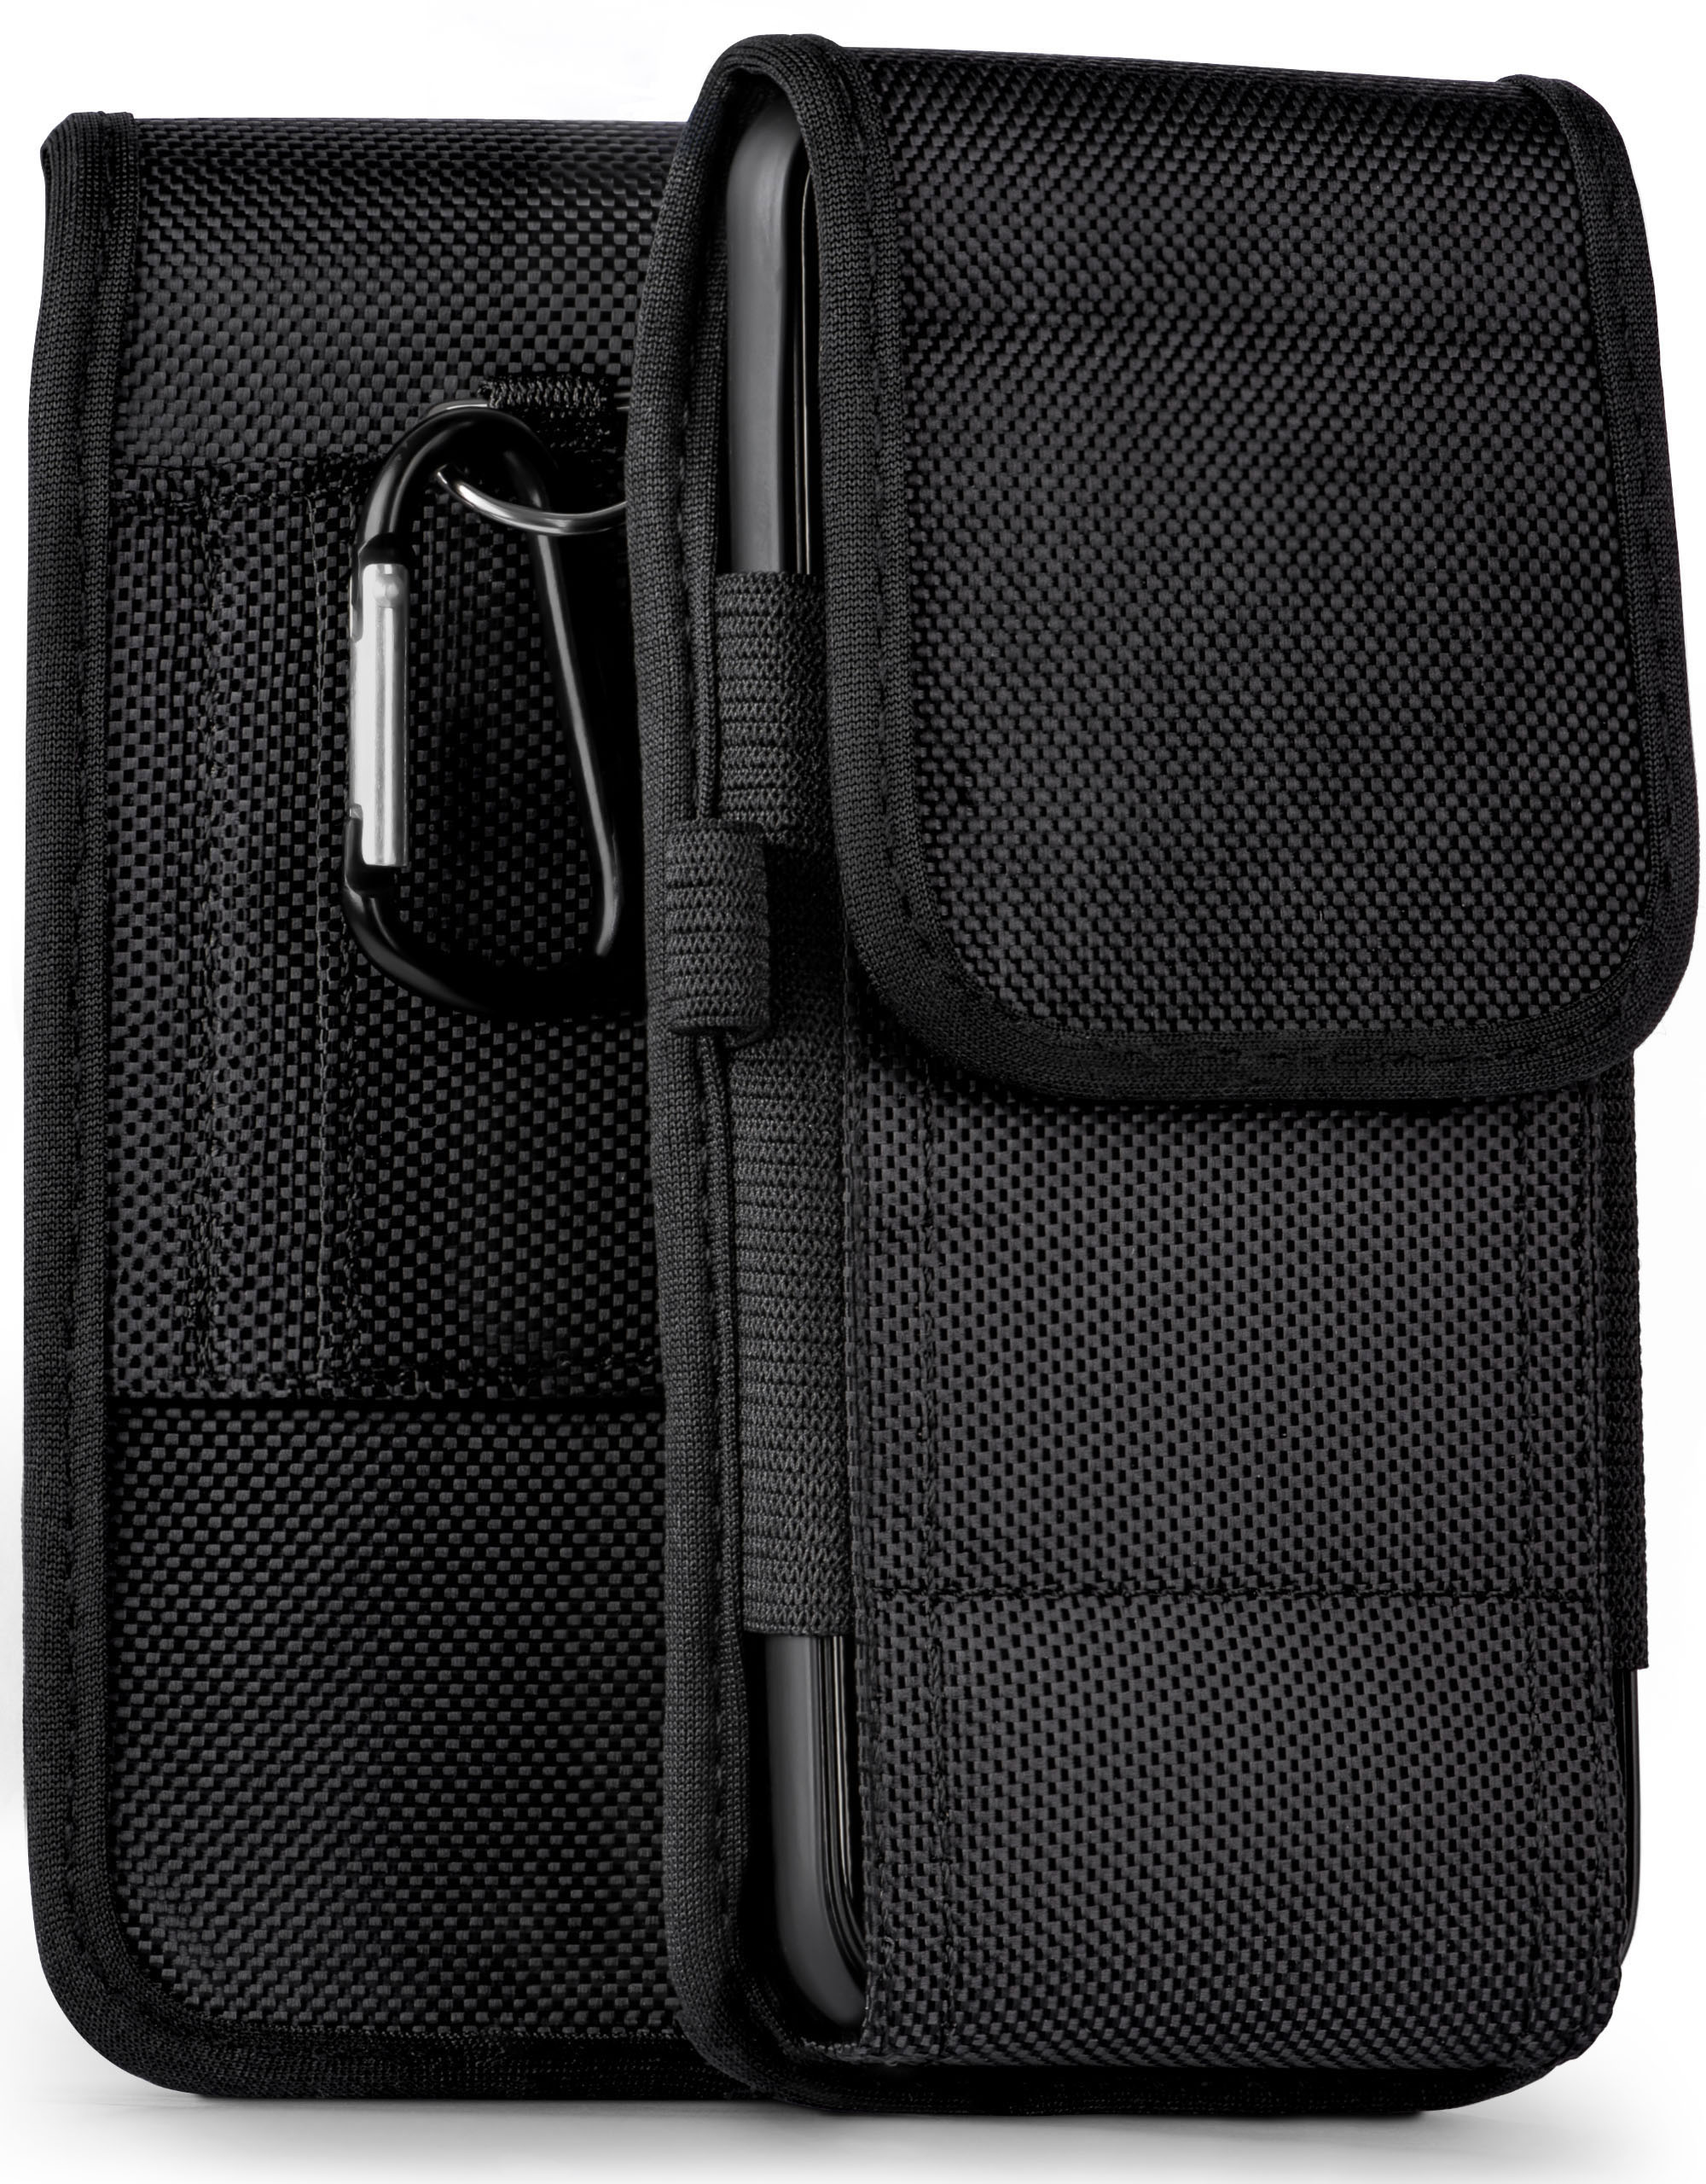 Case, Trail Holster, 8 MOEX Agility Sirocco, Nokia,